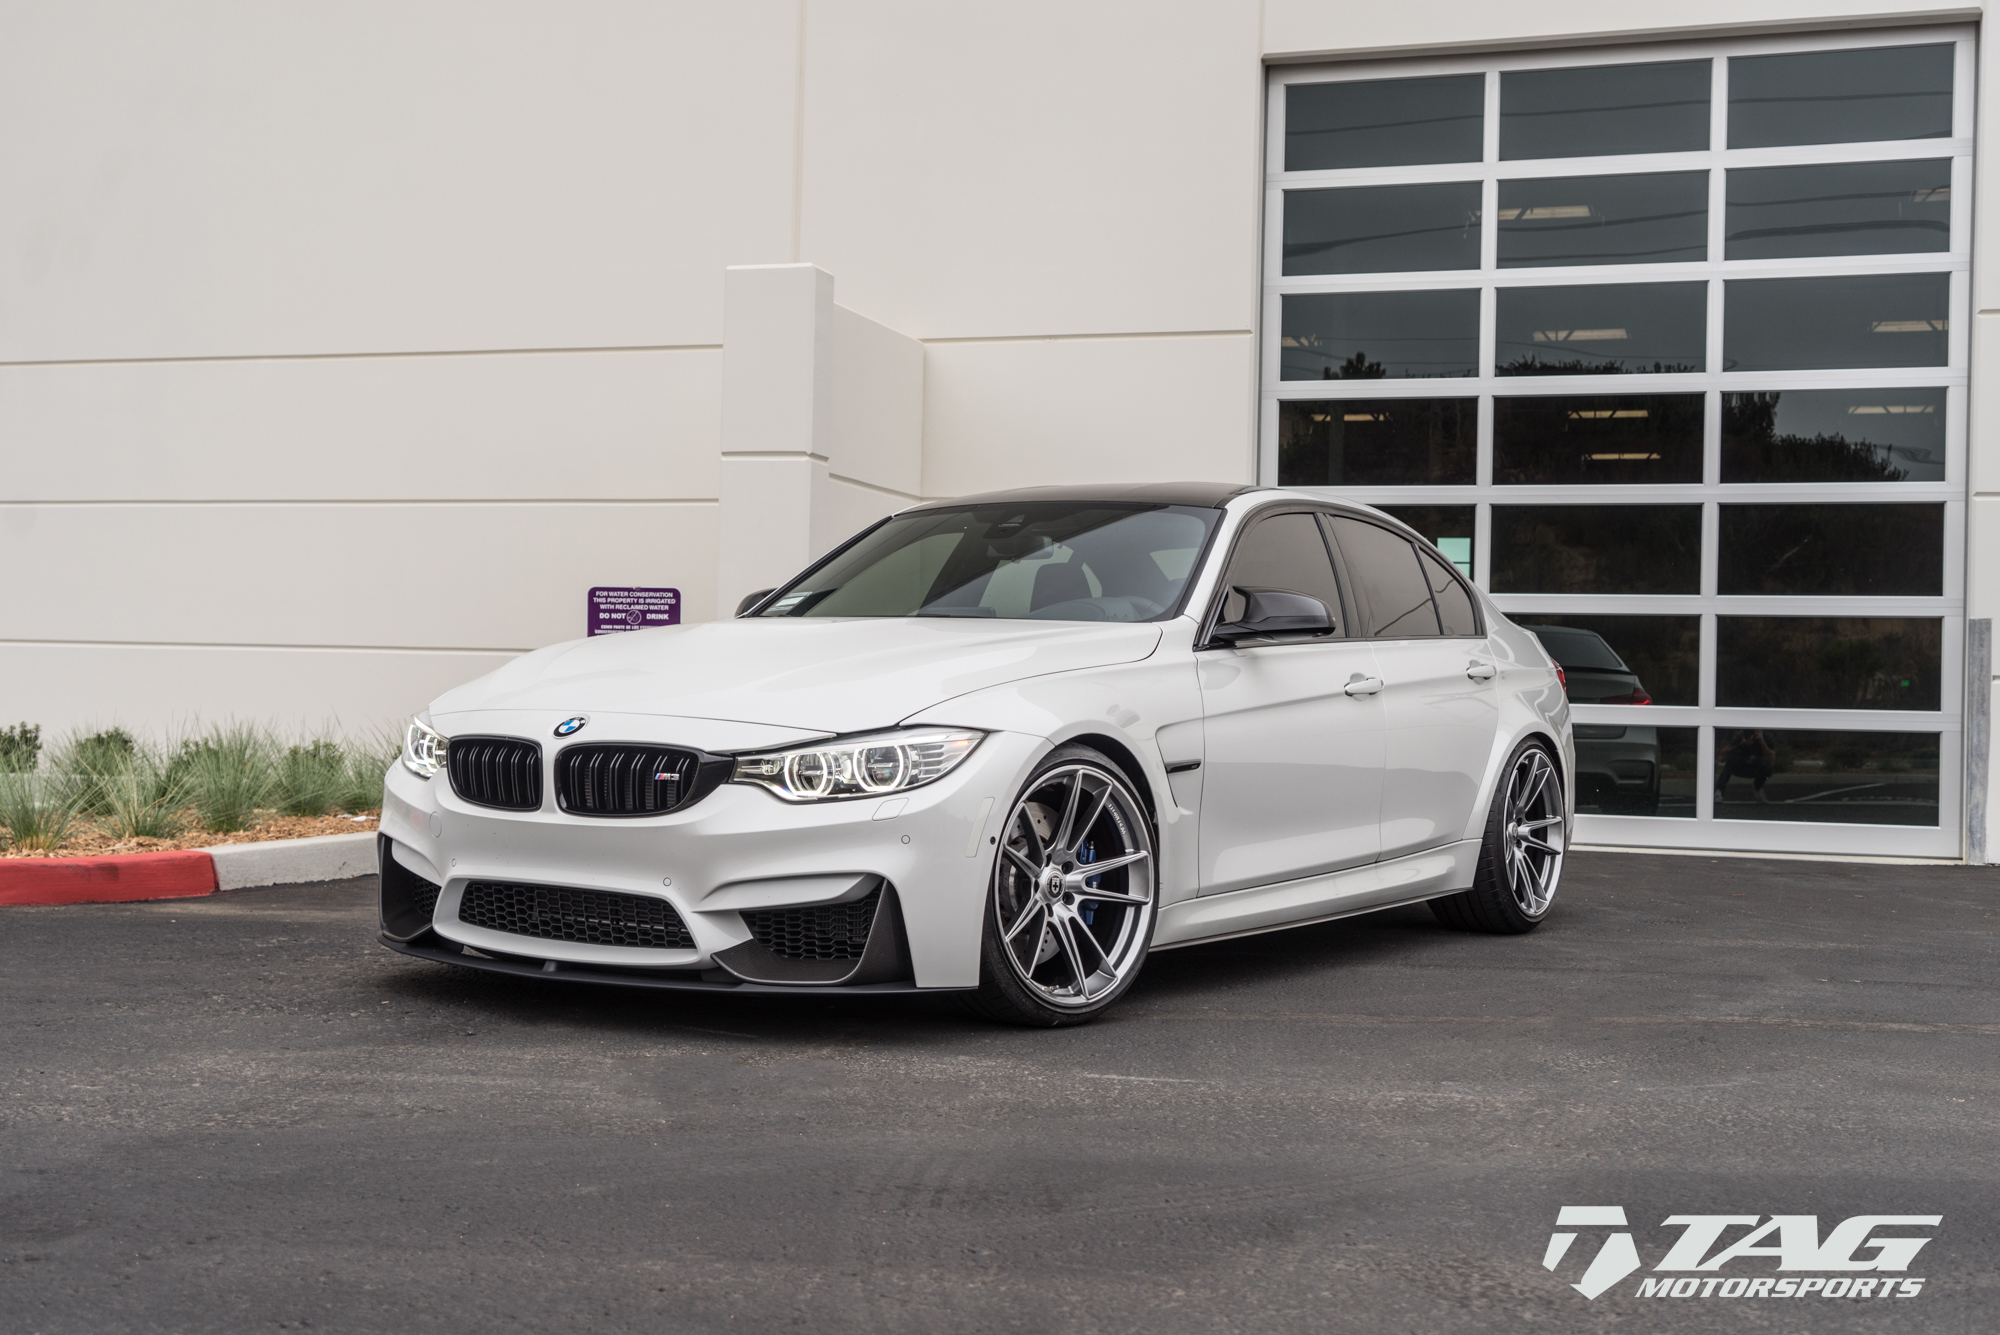 Clean F80 With Some Wonderful Touches